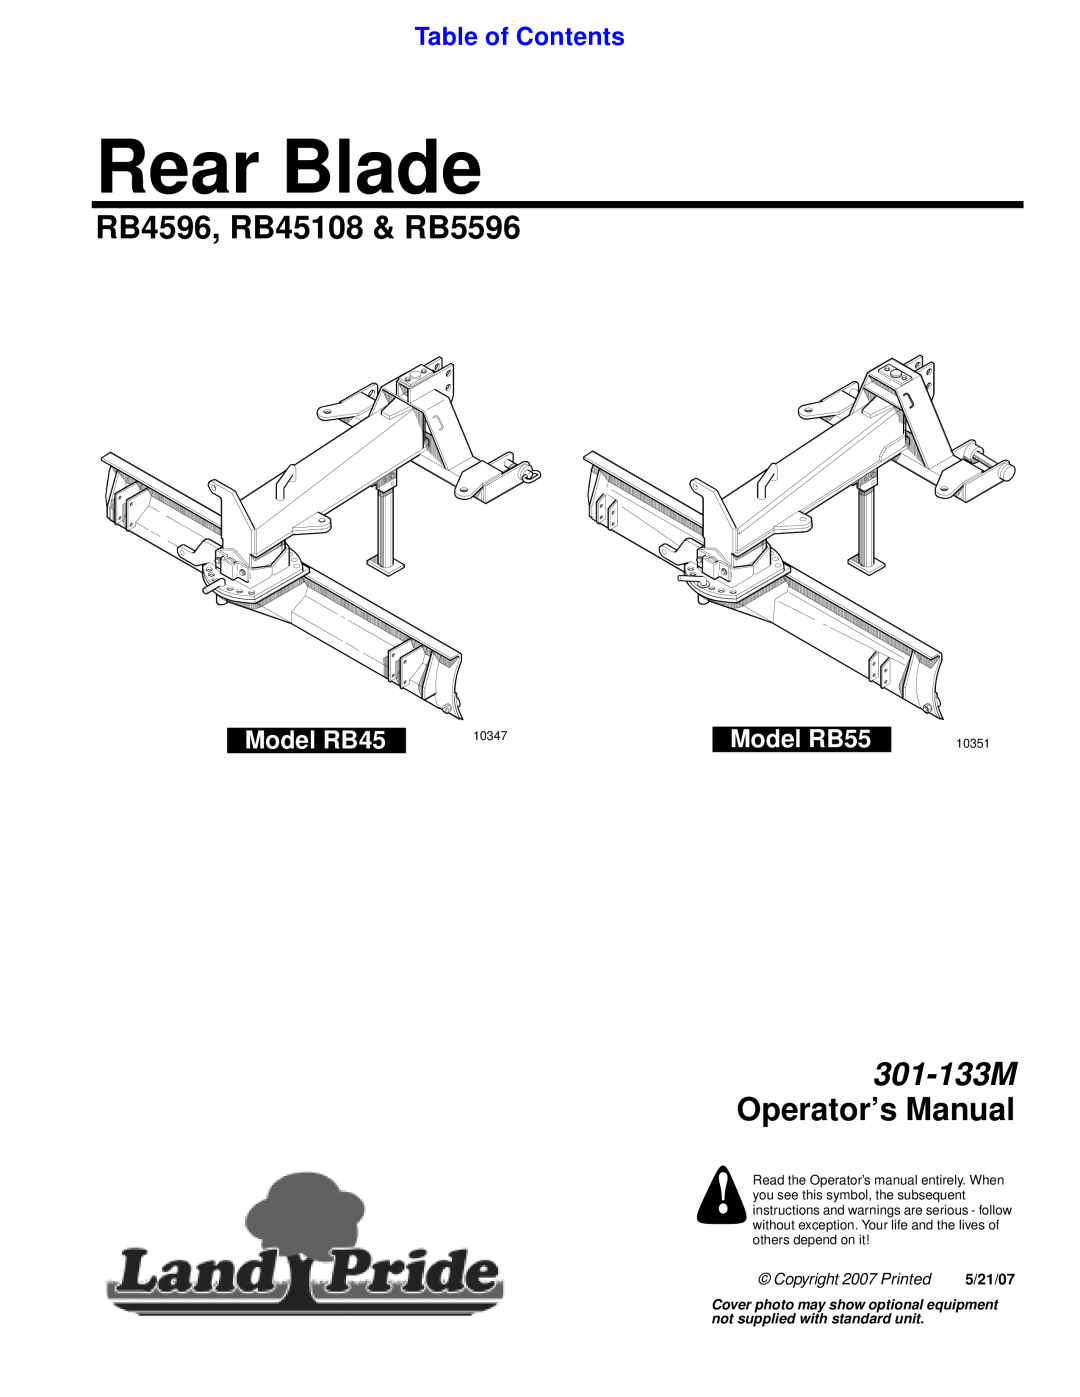 Land Pride manual Table of Contents, Model RB45, Model RB55, Rear Blade, RB4596, RB45108 & RB5596, 5/21/07, 10347 